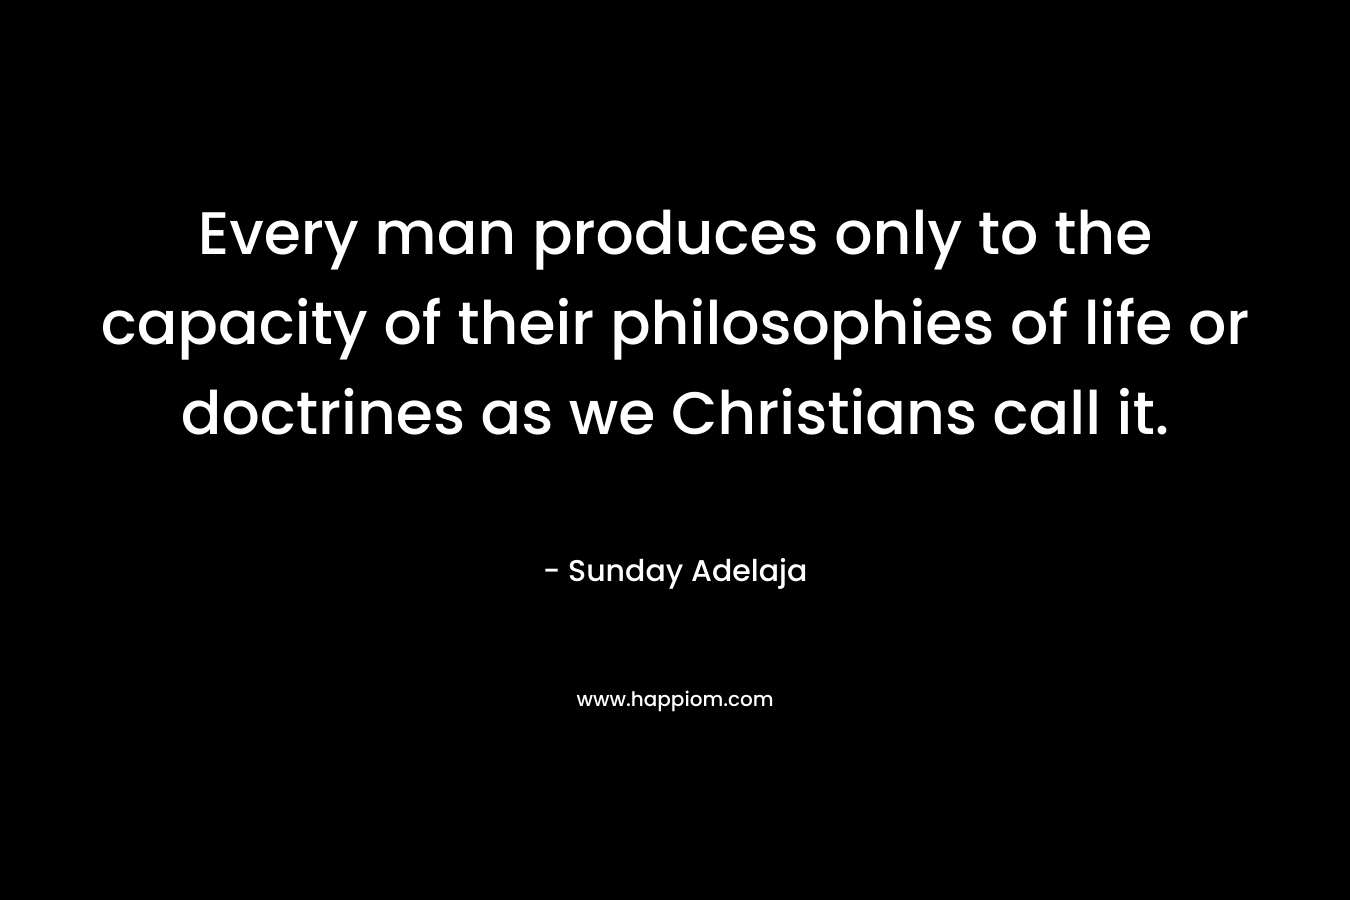 Every man produces only to the capacity of their philosophies of life or doctrines as we Christians call it.